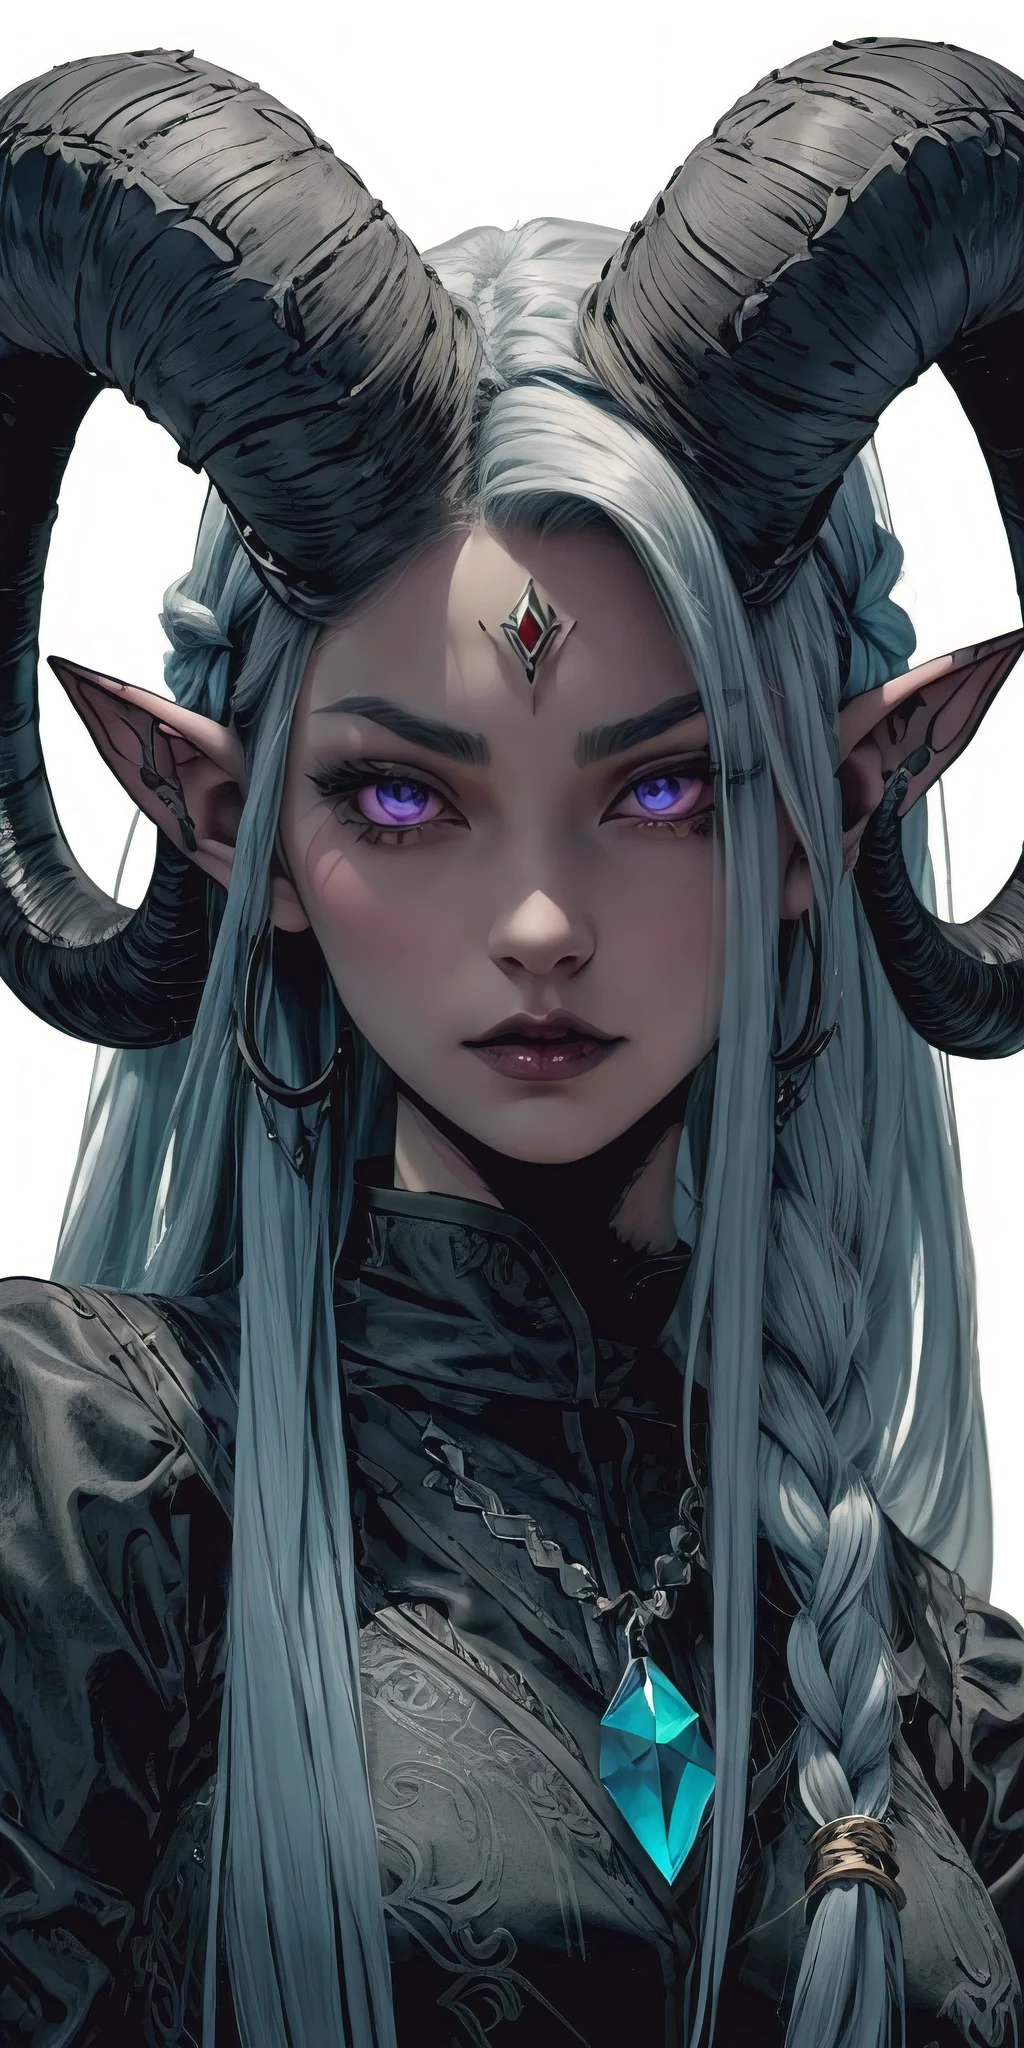 Gigantic Devil ram-Horns. Fangs, Oversized horns coming out of her head. Sharp fangs. pointy ears and a devil's tail. Grey-blue skin tone. Asian beautiful face. A Tiefling Warlock named Skylla, in Photoreal Anime interpretation. In the Castle of Dracula, Skylla the Warlock stands surprised, her full lips slightly agape, her eyes are milky white, and stunned, she looks unable to move as she transforms into a Vampire. In the Style of a Dark Fairytale. Her full lips slightly agape, her eyes are milky white, and stunned. Pointy ears, and horns, and delicate nose on a beautiful asian face wearing a Vampire gothic Warlock gothy gear. She has flowing long curls of Black-Blue braided hair cascading over her uniform, apron, shoulders and past her full wide hips. A Blue-black Haired devil-girl hybrid Witch. She is wearing a Ye Olde Black and Purple Warlocks's Street goth wear, with frilly stained wristlets. Fantasy Vampire Dark Castle Interior Background. Photoreal Vampire gothic style